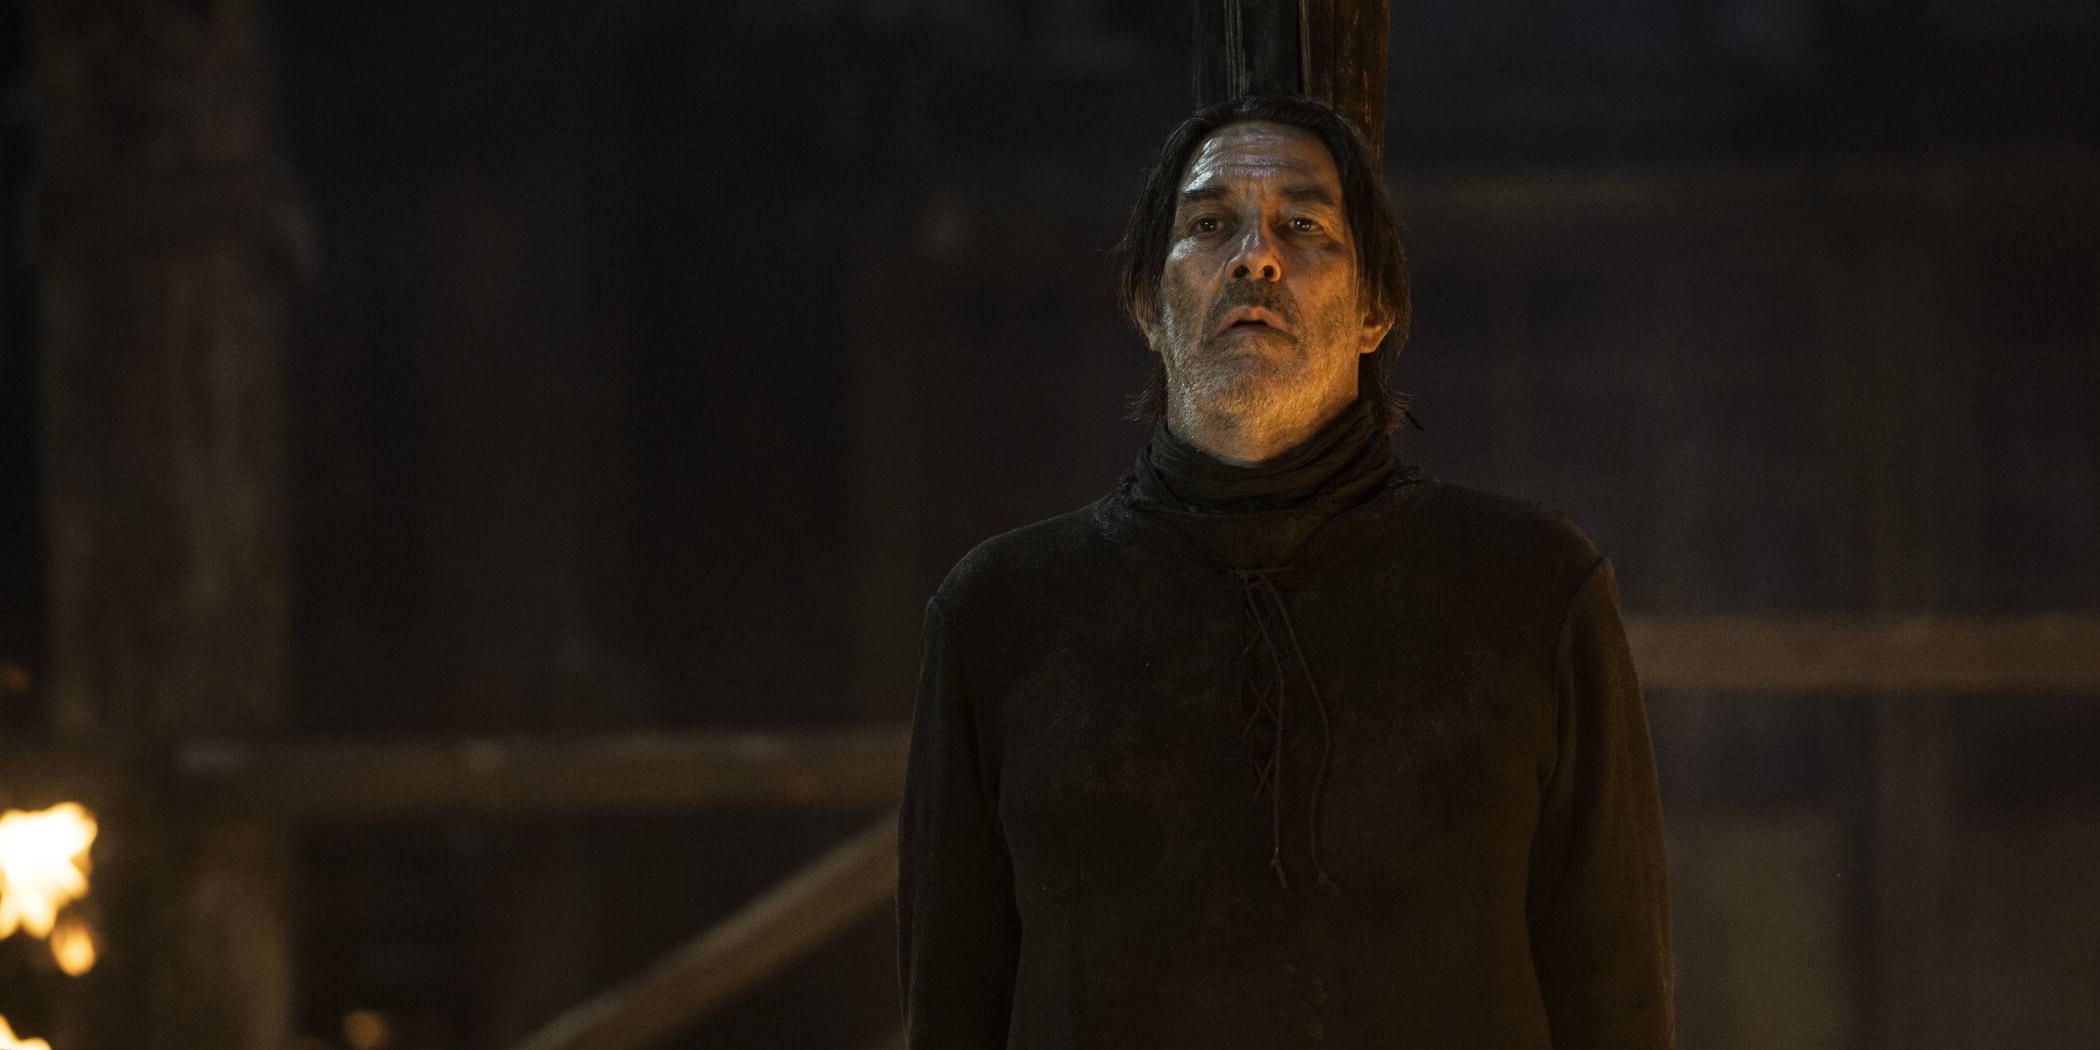 Mance Rayder burned at the stake in Game of Thrones